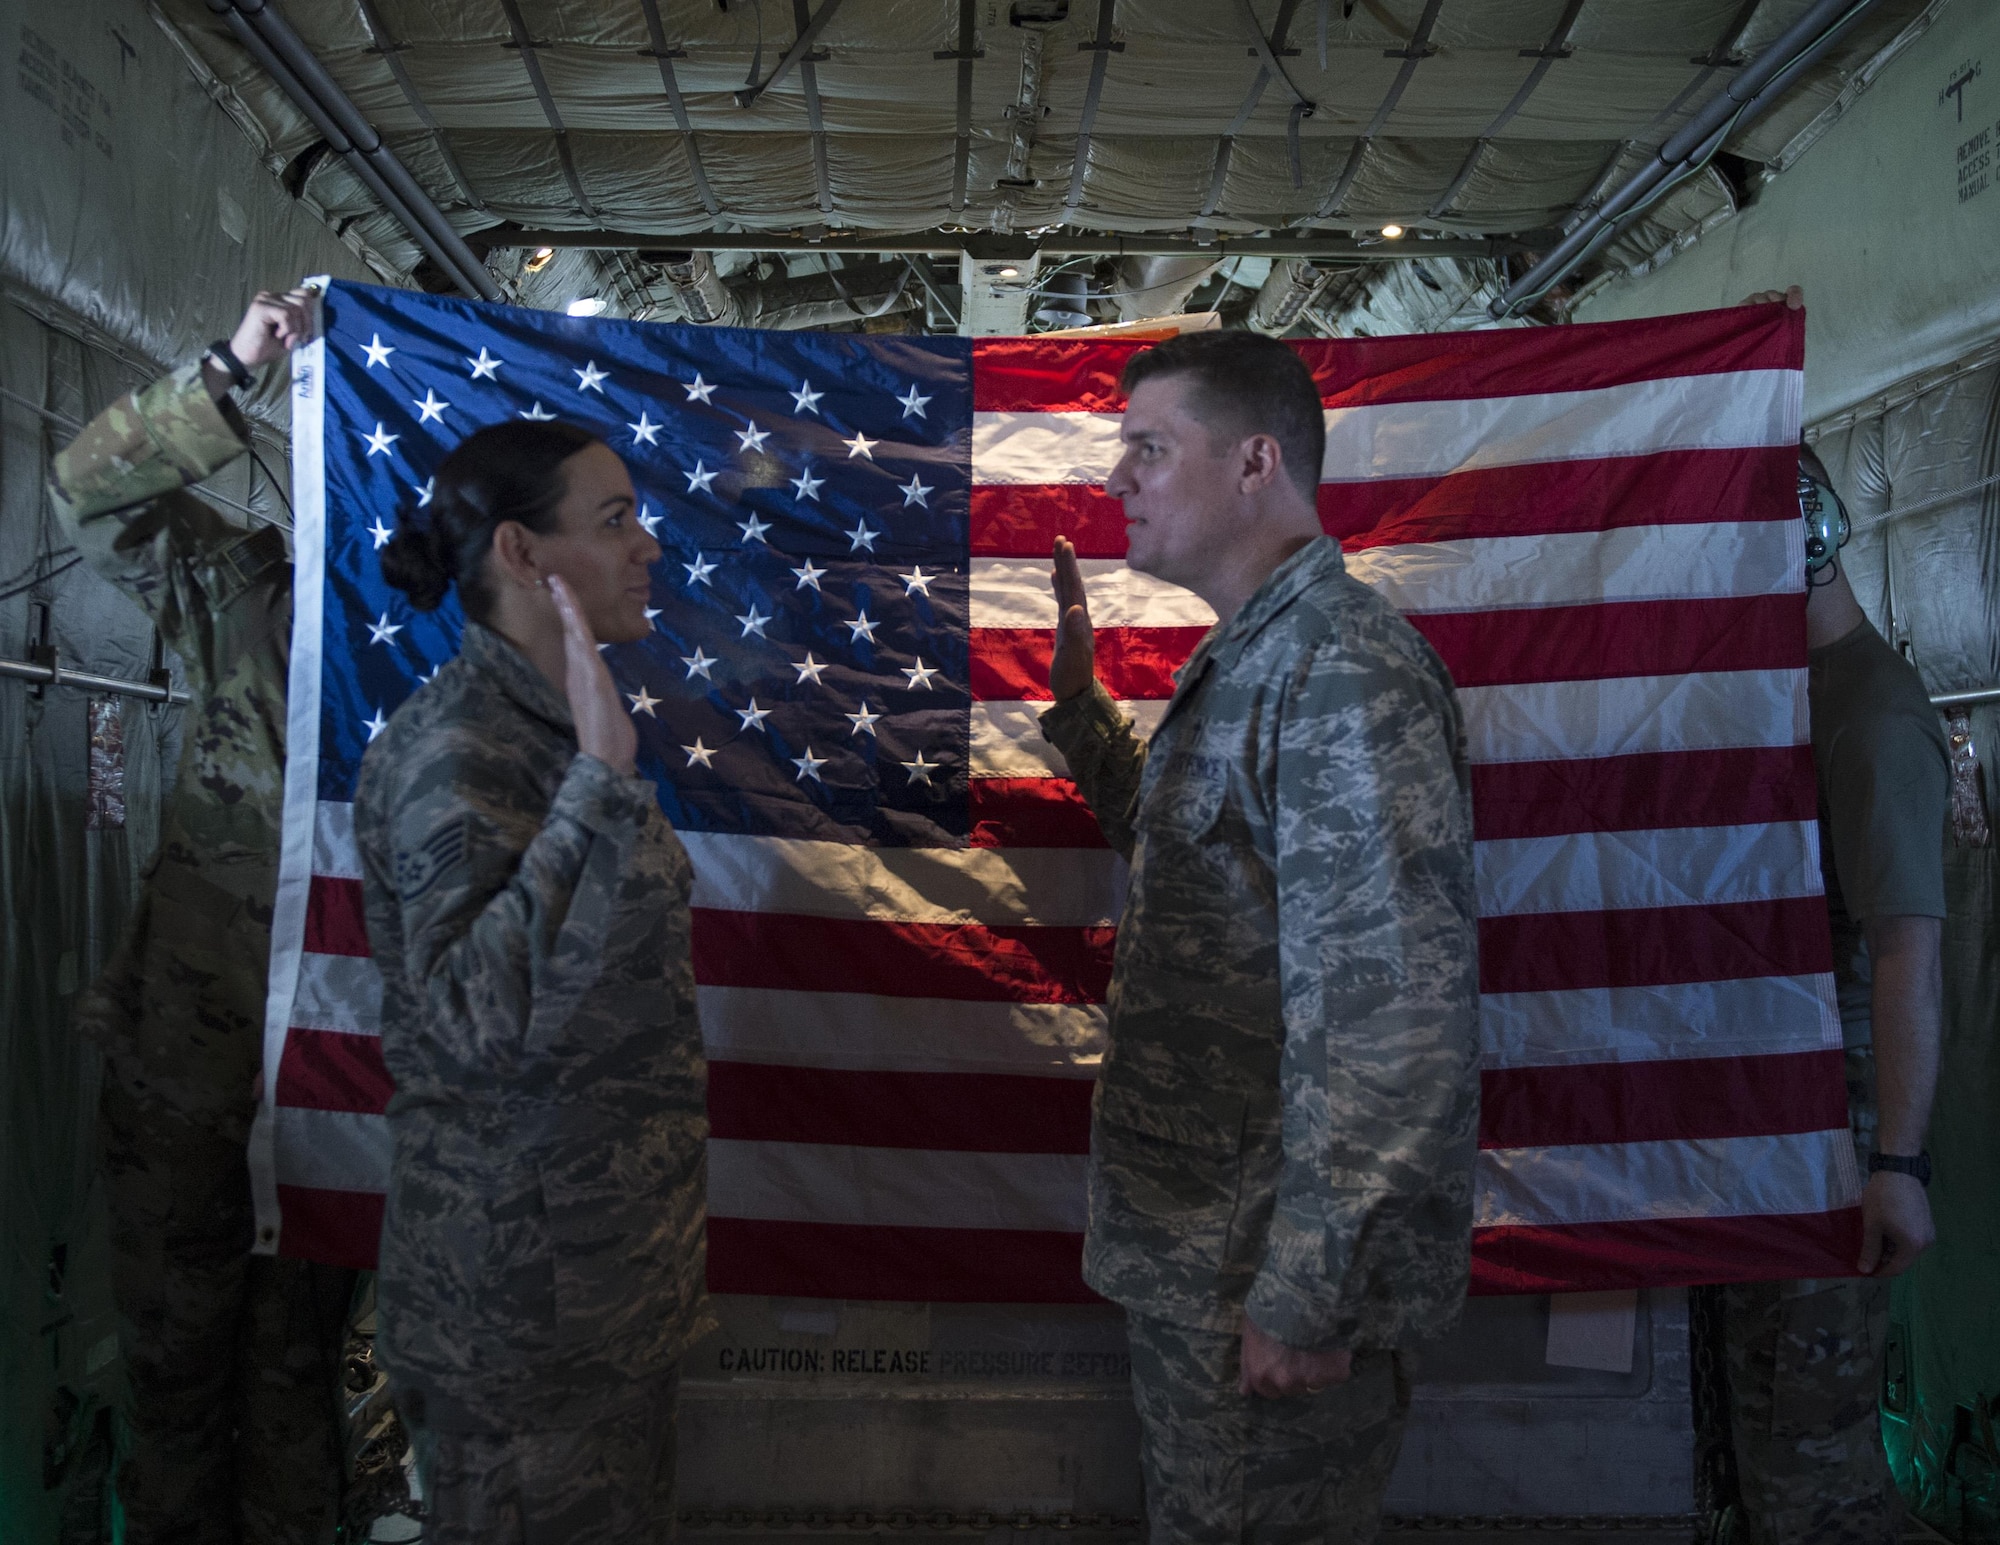 In the cargo bay of a C-130 Hercules from the 911th Airlift Wing, Pittsburgh Air Reserve Station, two loadmasters hold up a U.S. flag.